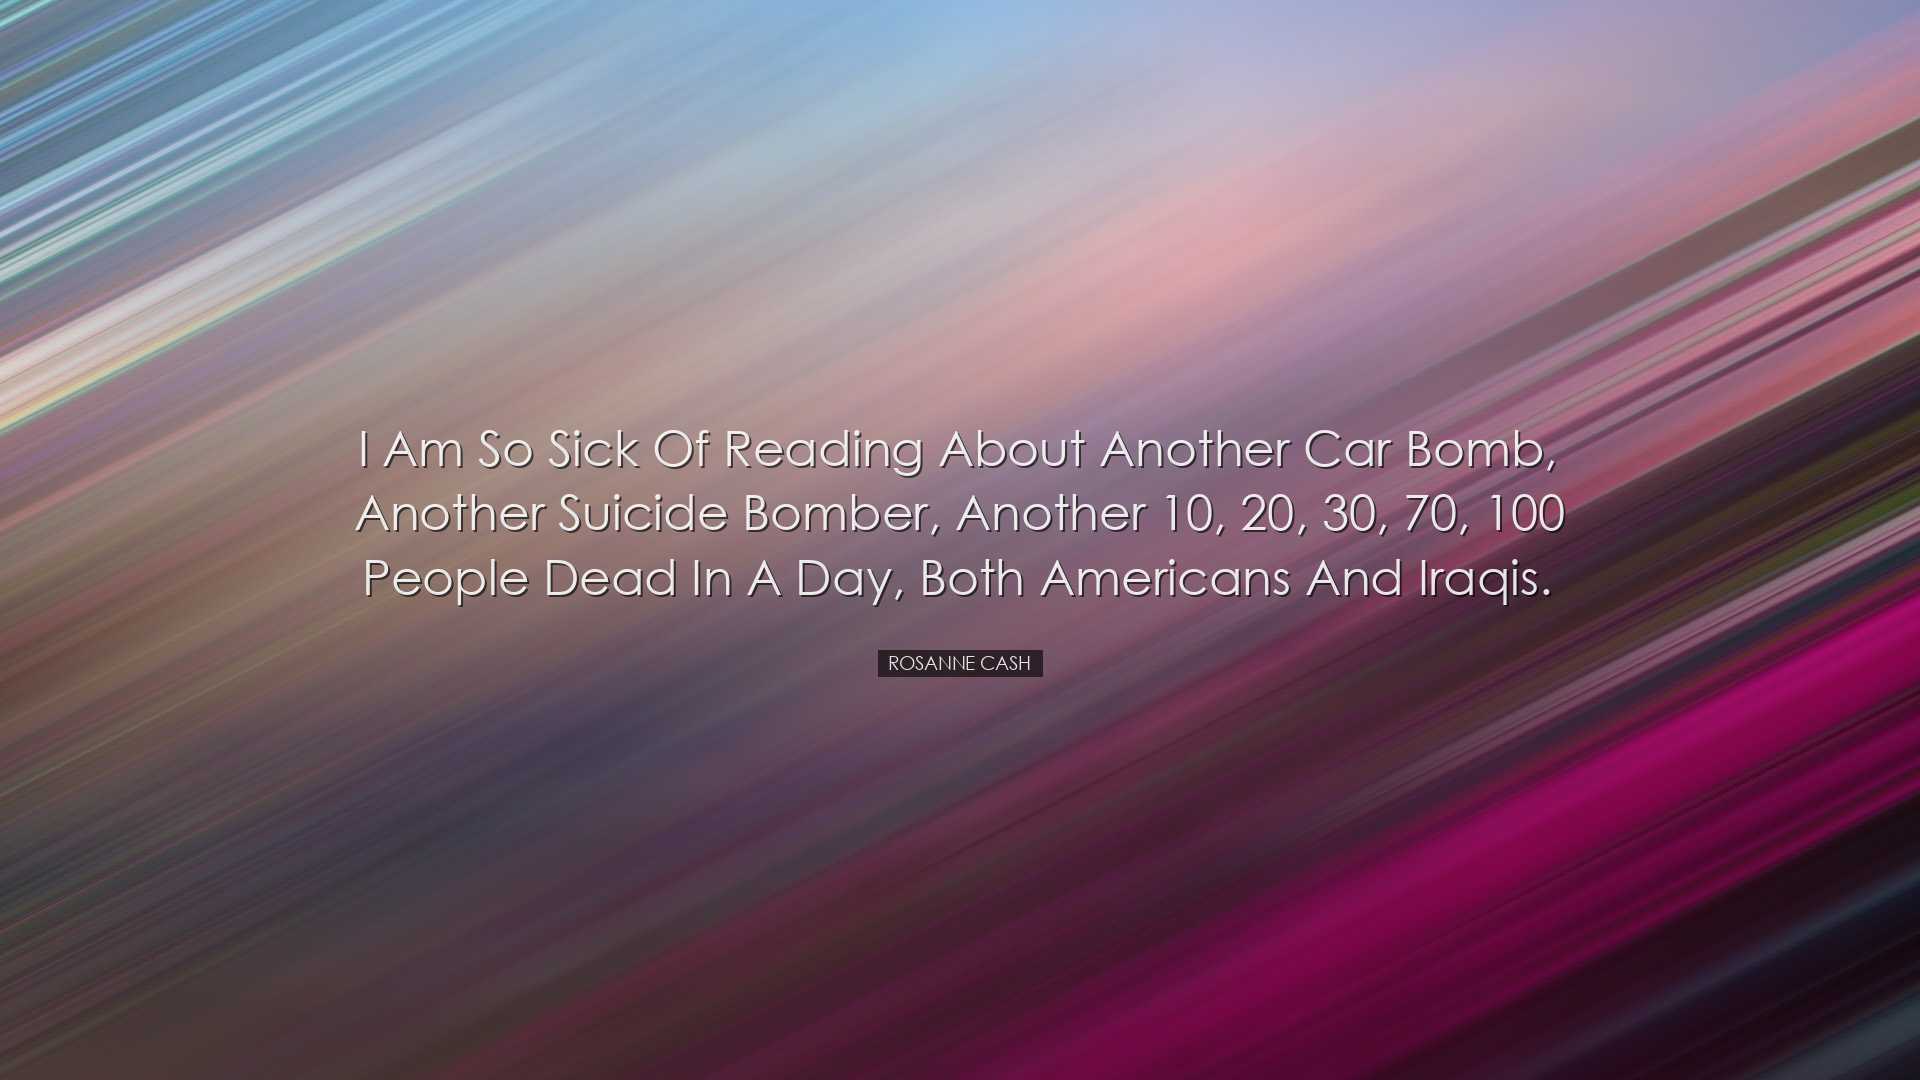 I am so sick of reading about another car bomb, another suicide bo